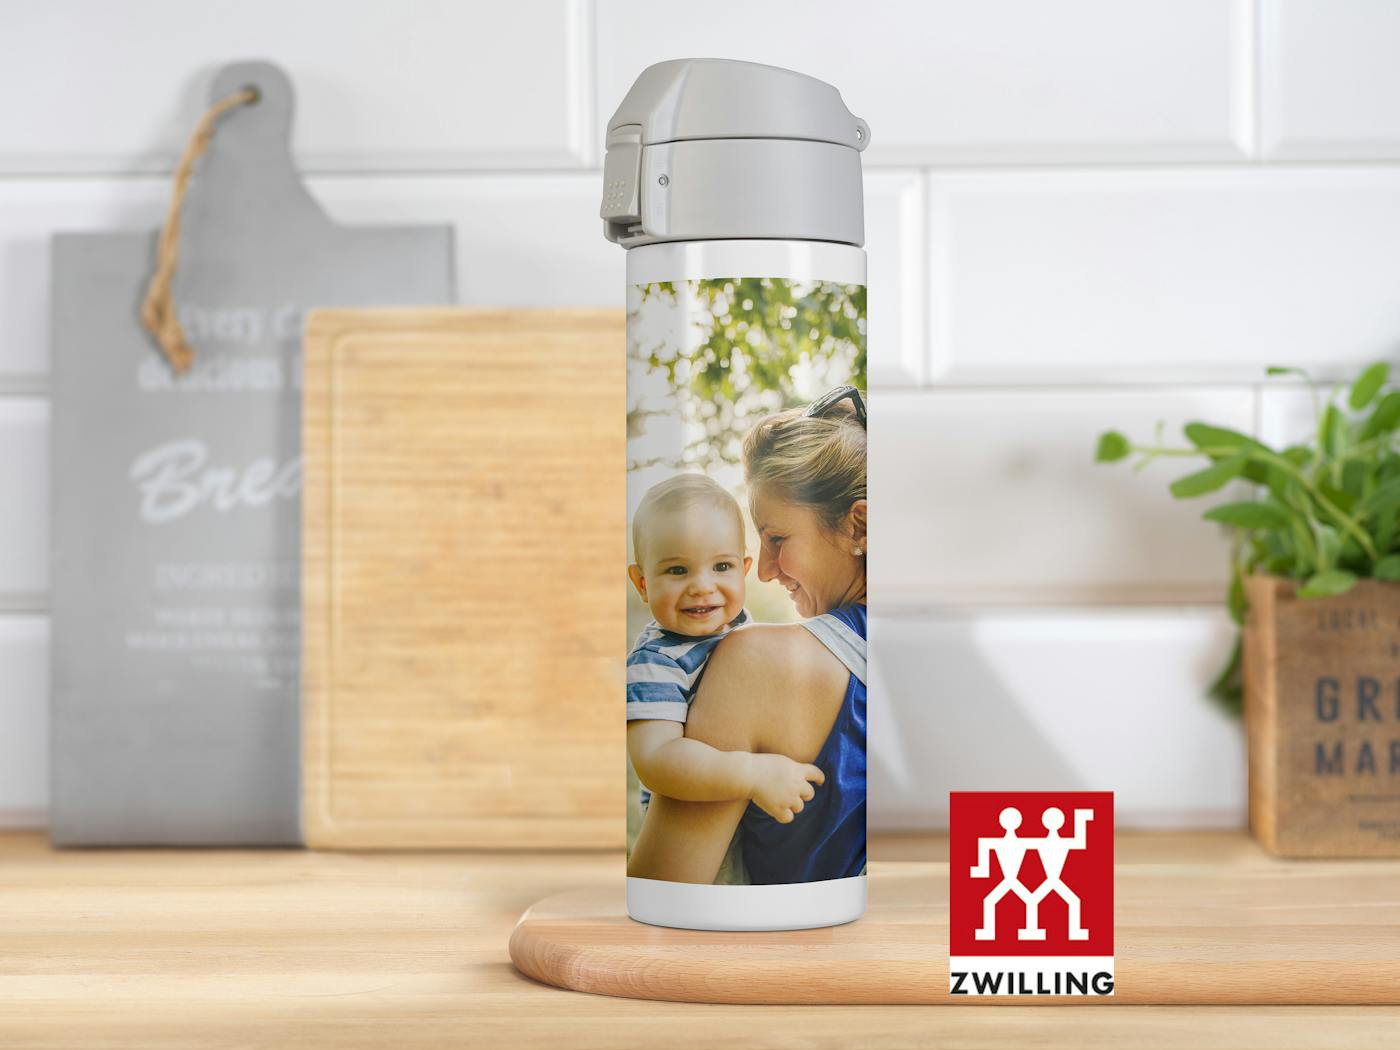 NEW: ZWILLING Thermo mug with photo